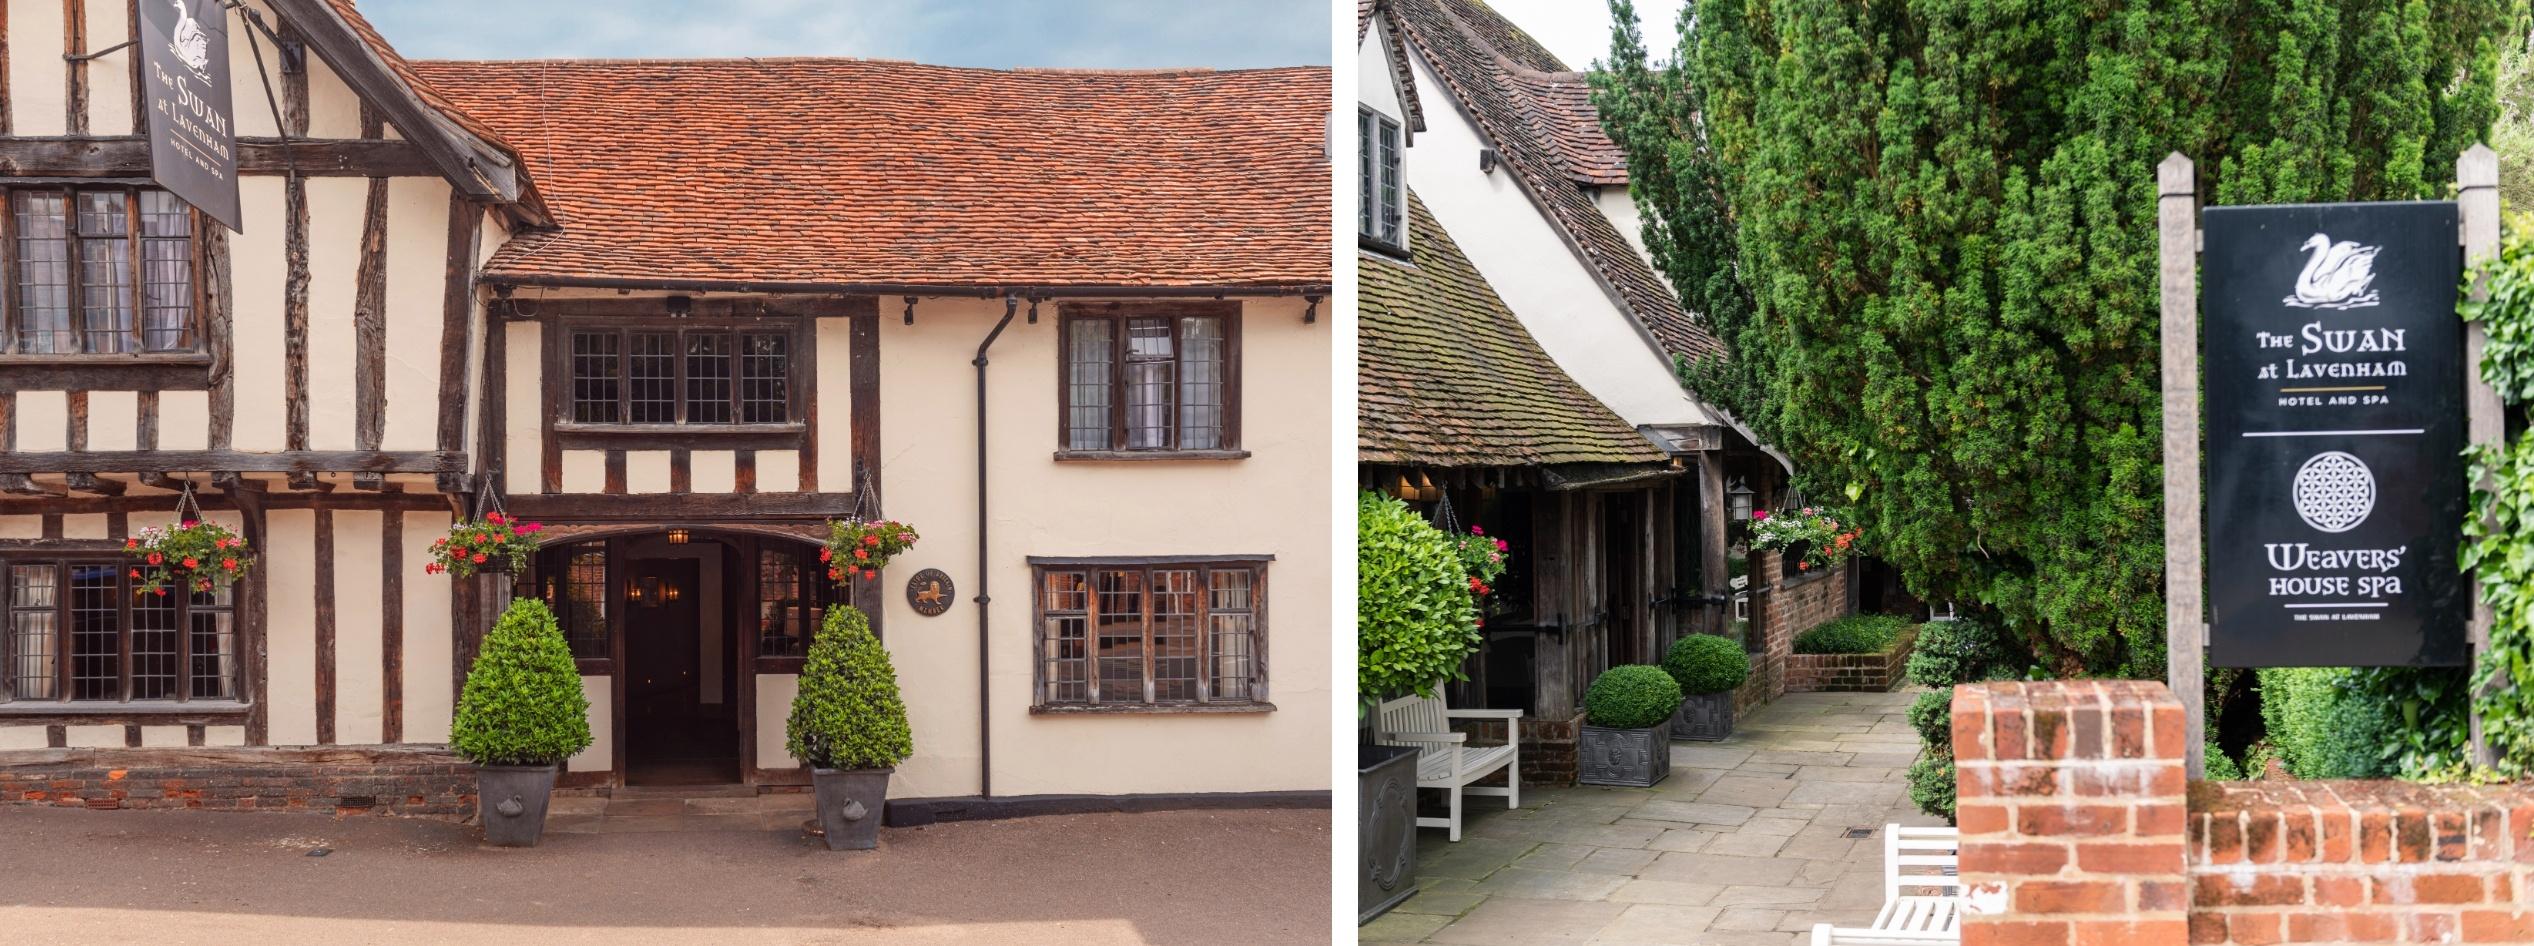 Hotel Of The Month May 2022: The Swan at Lavenham Hotel and Spa